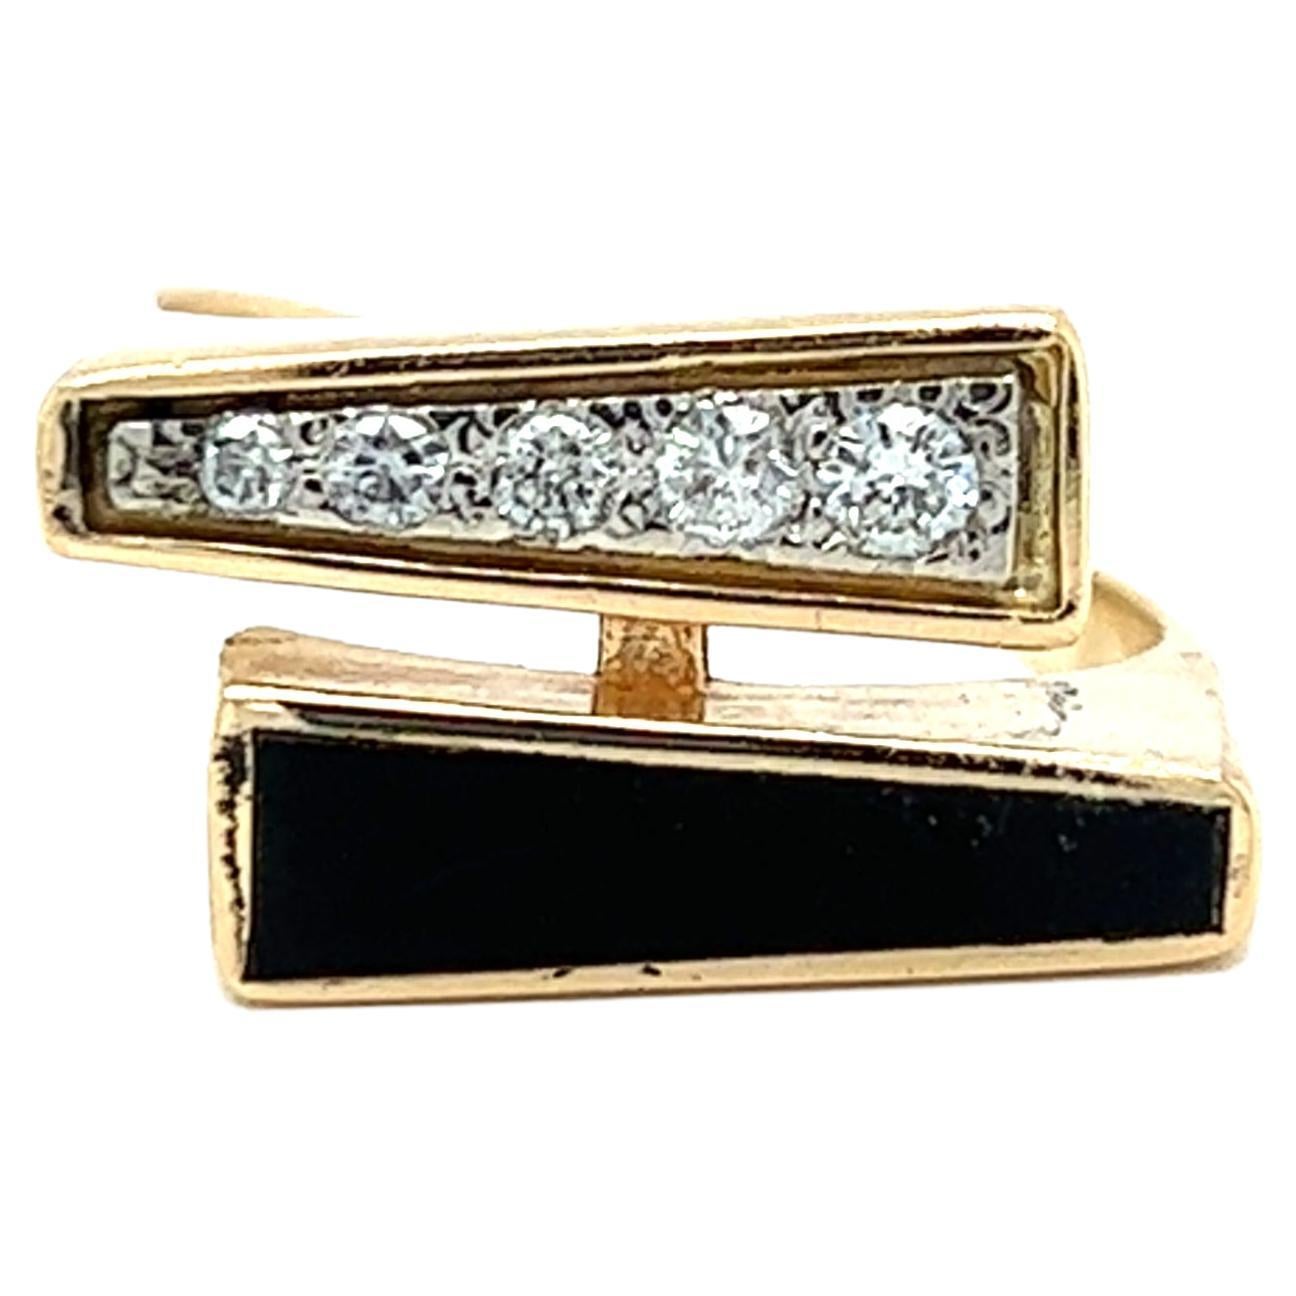 One 14 karat yellow gold bypass design ring set with one black coral tapered baguette tablet measuring 14.5x3.5mm and five (5) round brilliant cut diamonds, approximately 0.10 carat total weight with matching I/J color and Si1 clarity. The ring is